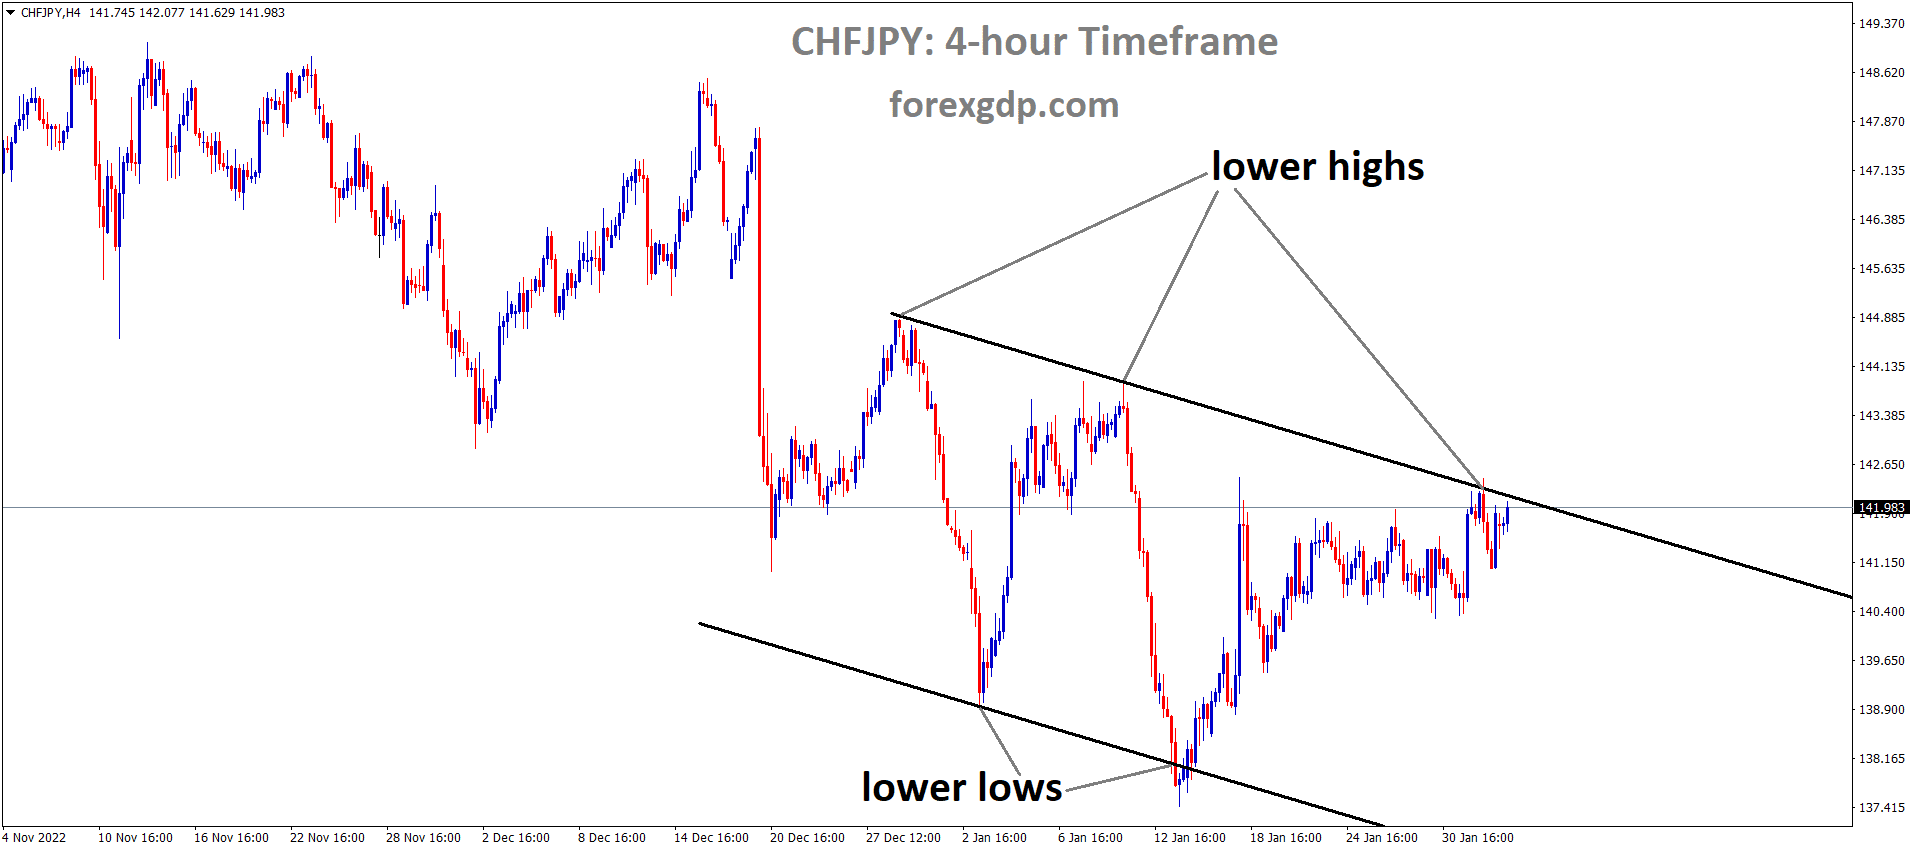 CHFJPY is moving in the Descending channel and the market has reached the lower high area of the channel 1